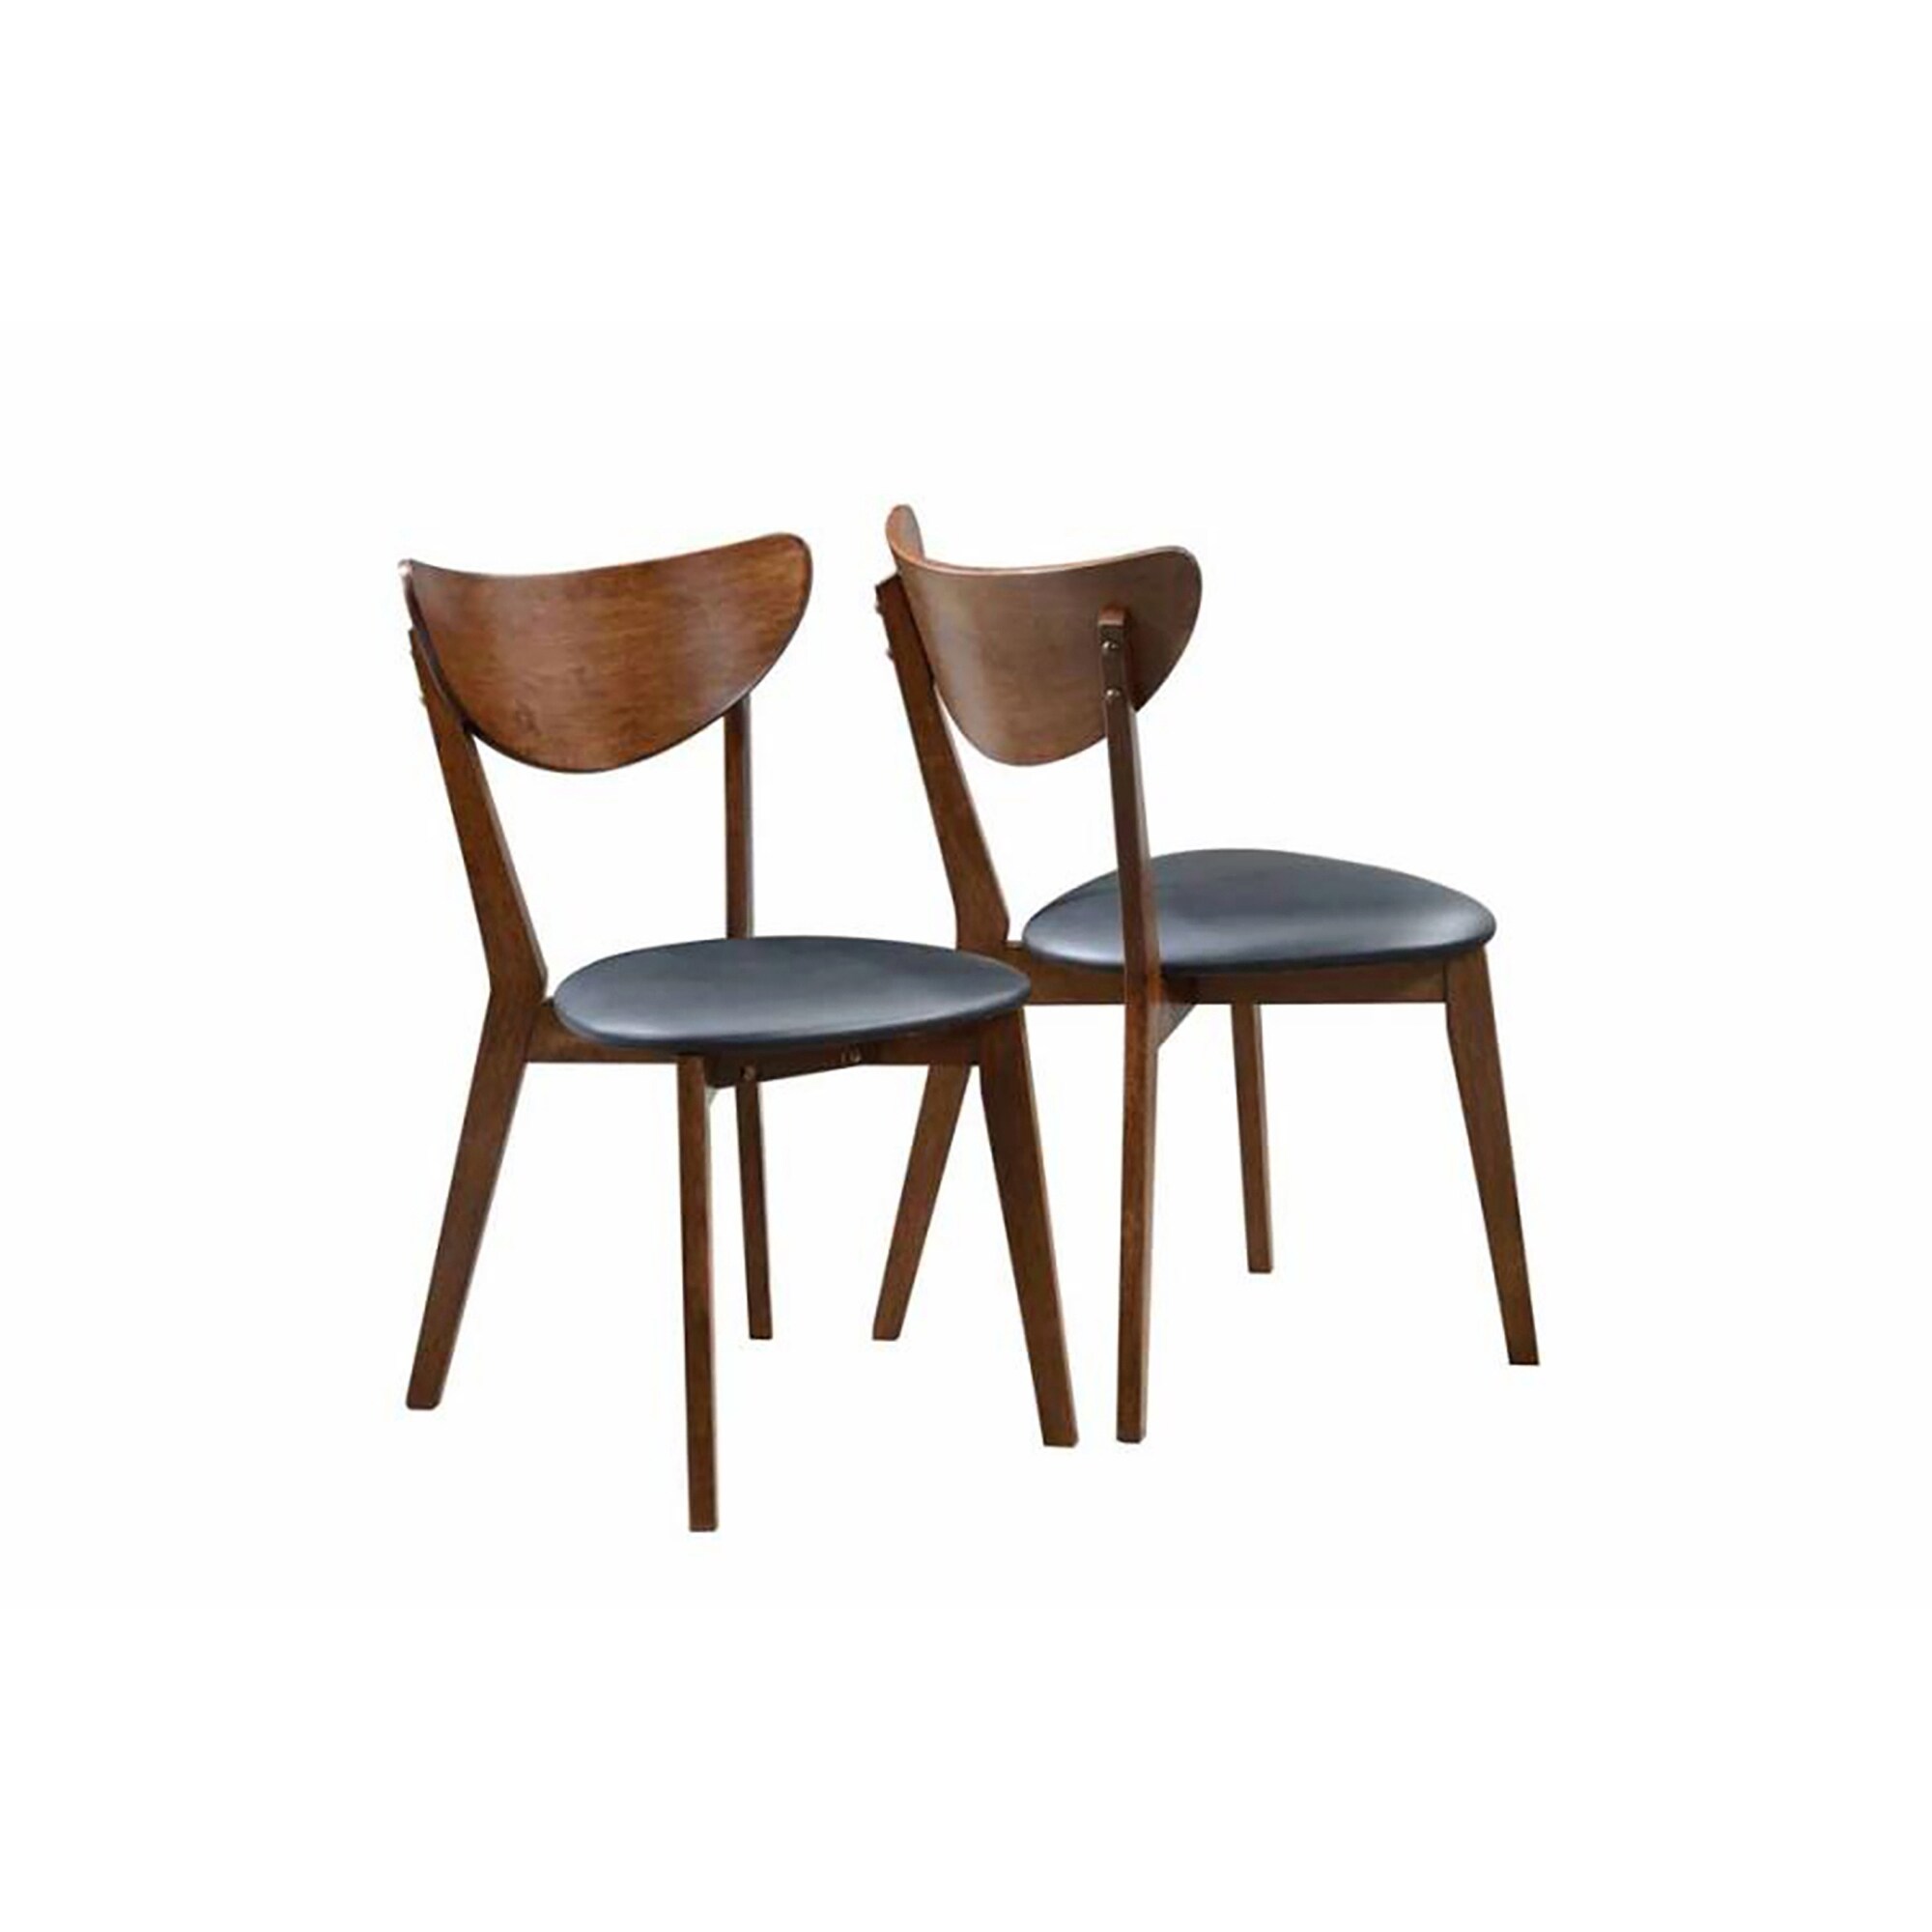 Marvin Mid-Century Modern Faux Leather Dining Chairs (Set of 2)